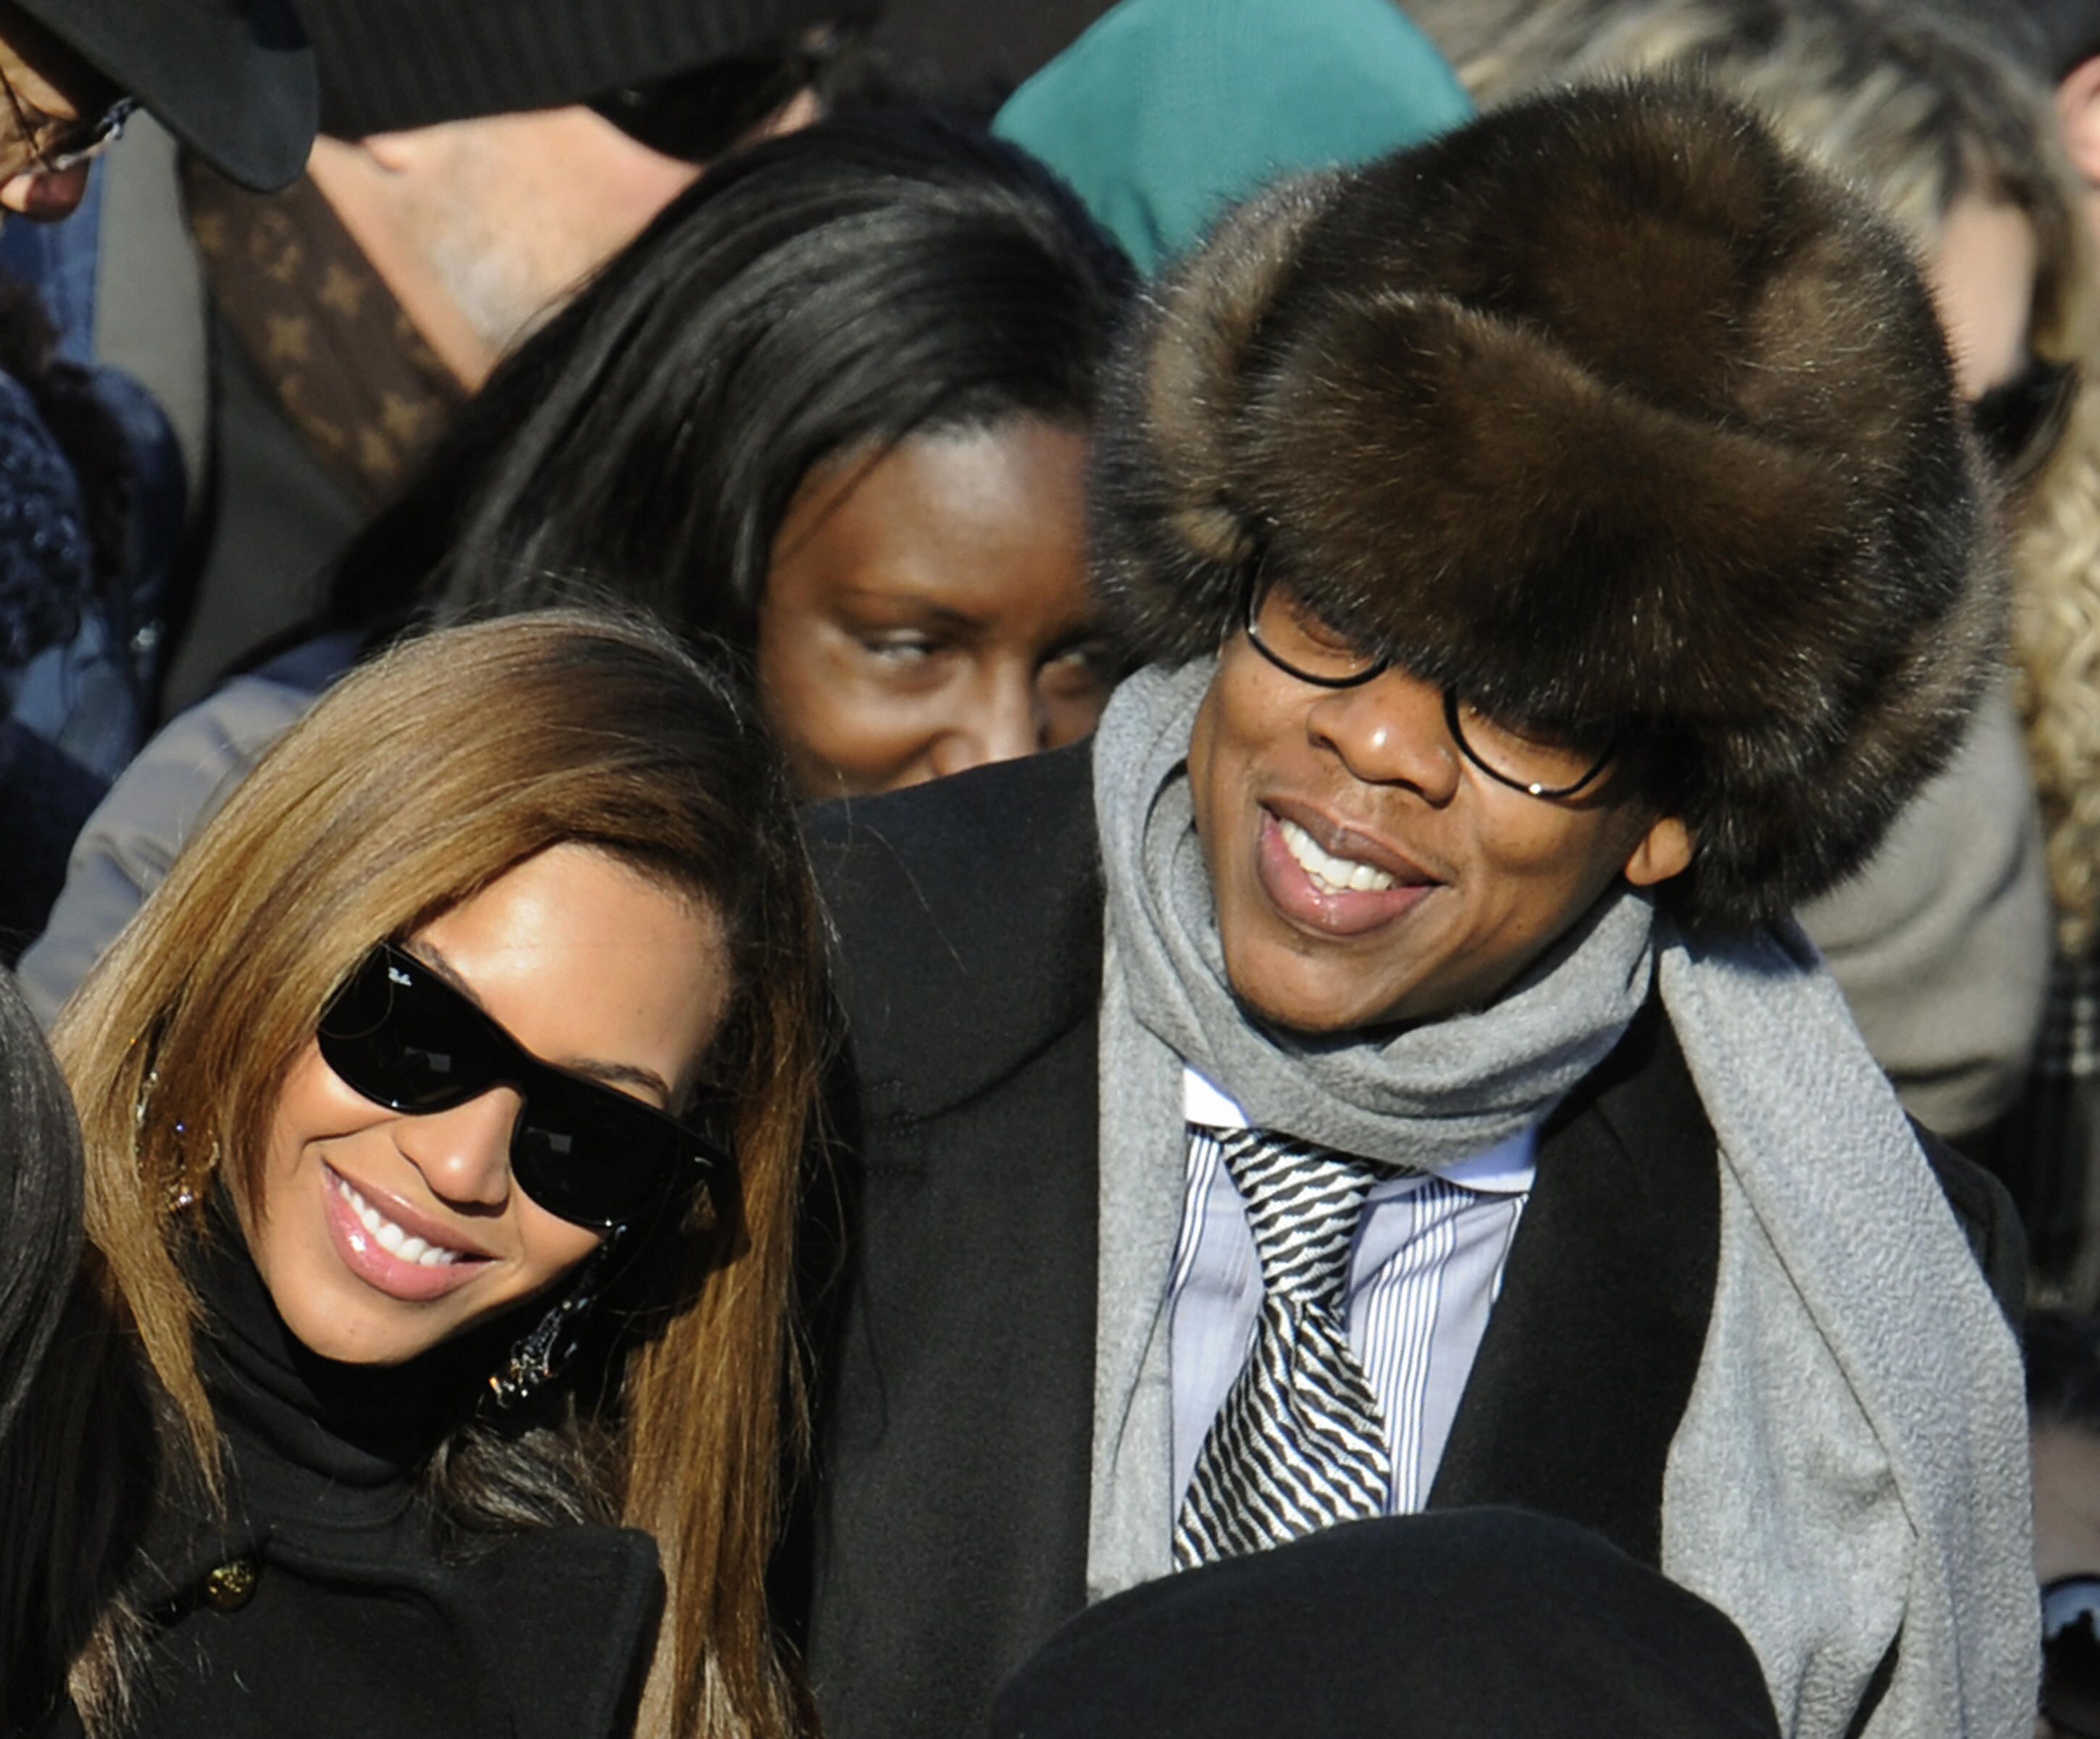 A Look At Beyoncé & Jay-Z's Style Glow-Up On Their 11th Anniversary